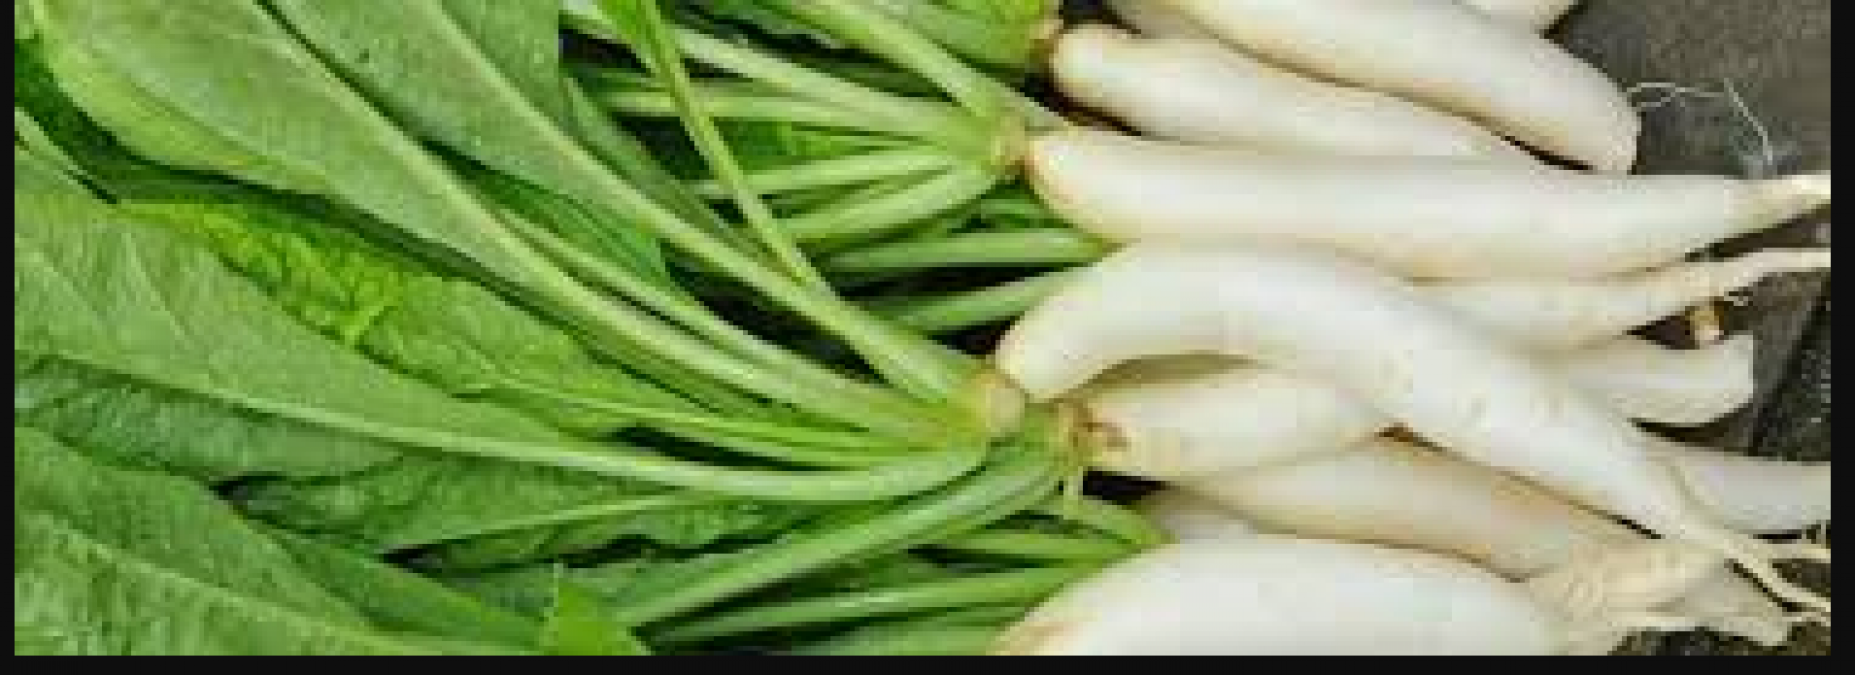 Eating radish can eliminate these diseases, it is full of these qualities, know